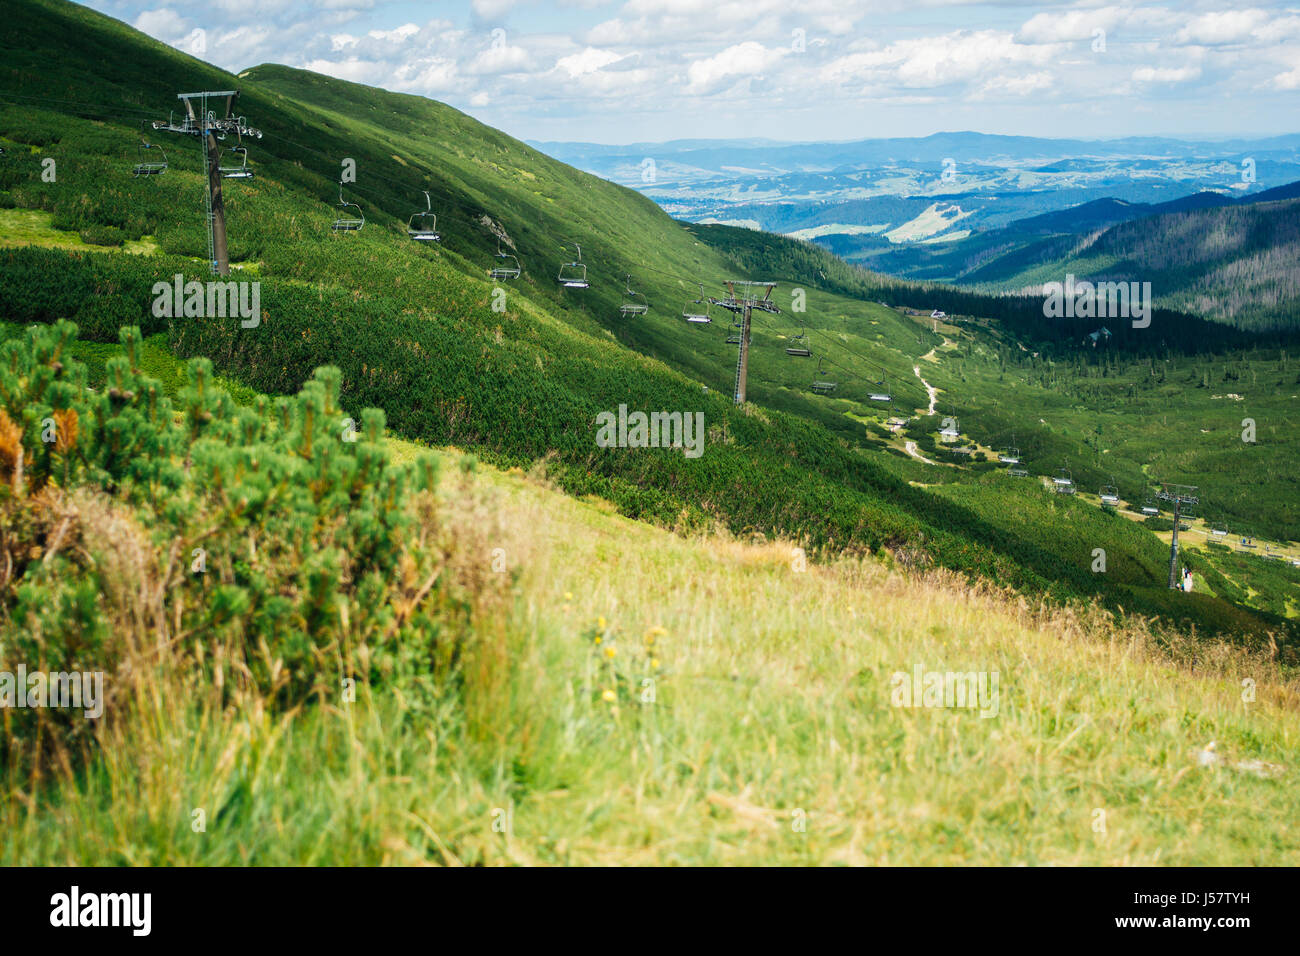 Ski lift in summer Tatra mountains in Poland on the Kasprowy Wierch. Stock Photo